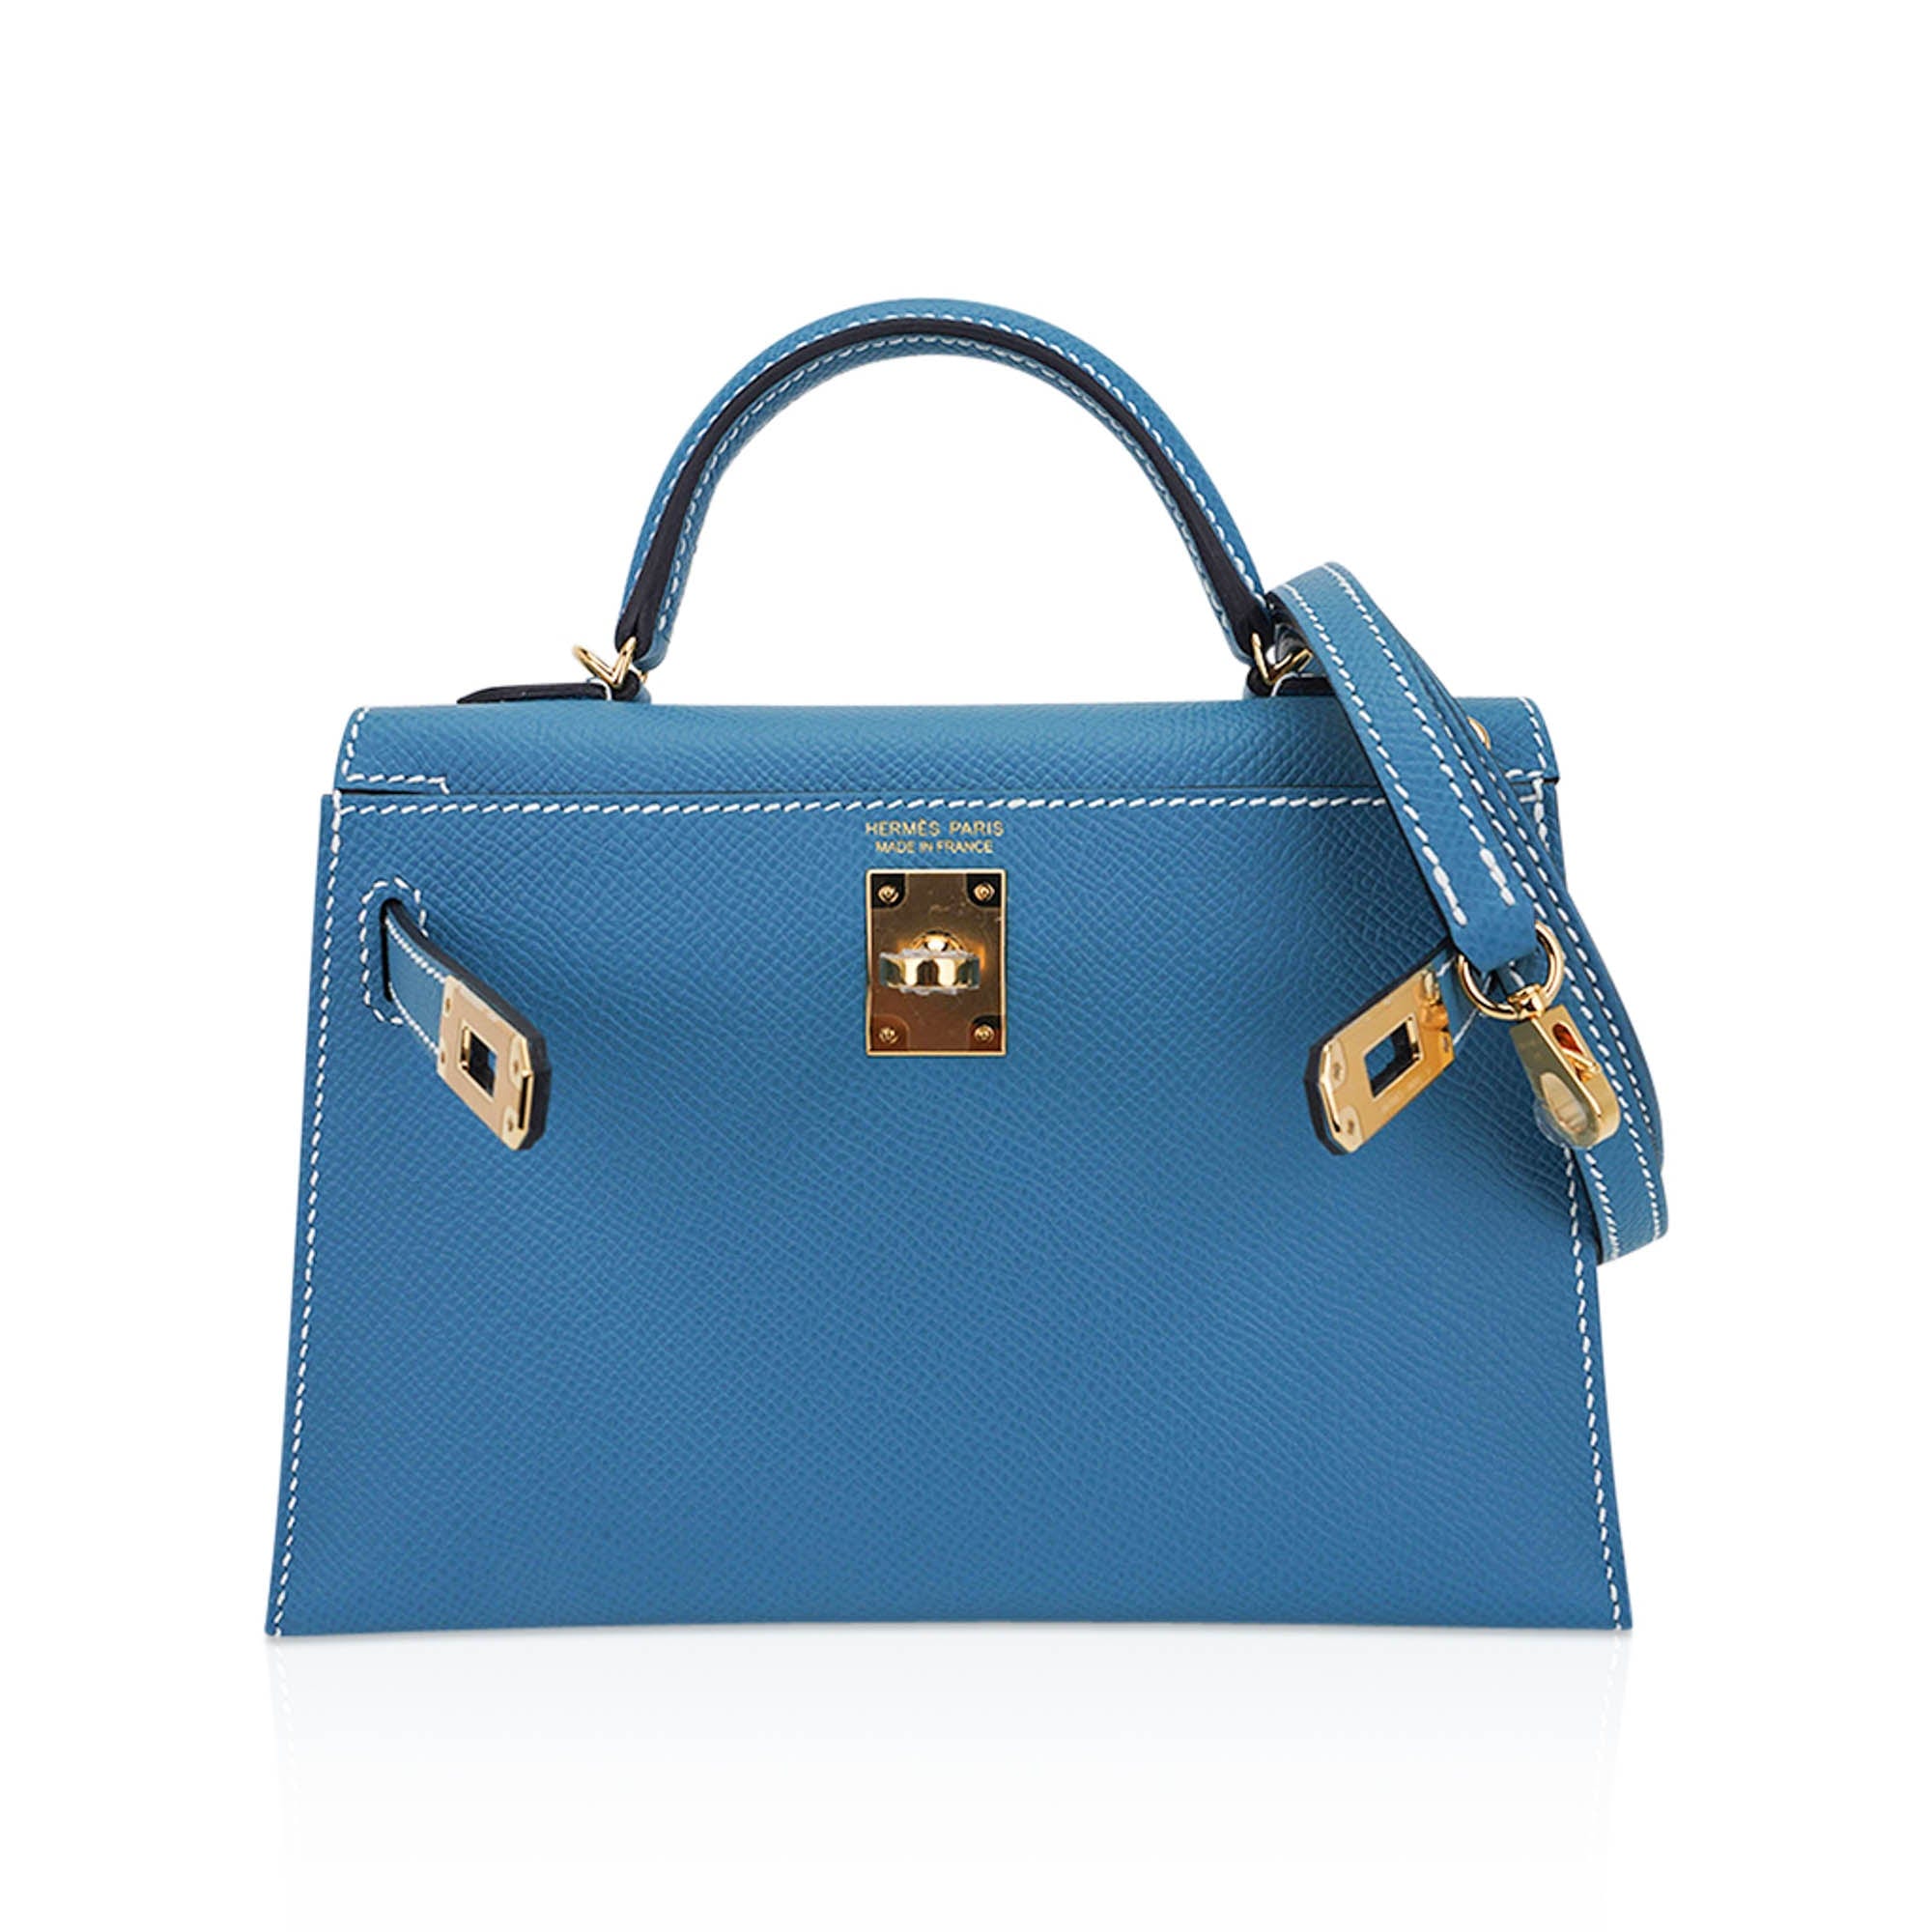 Hermes Mini Kelly 20 Bag Sellier New Blue Jean Epsom Leather with Gold Hardware